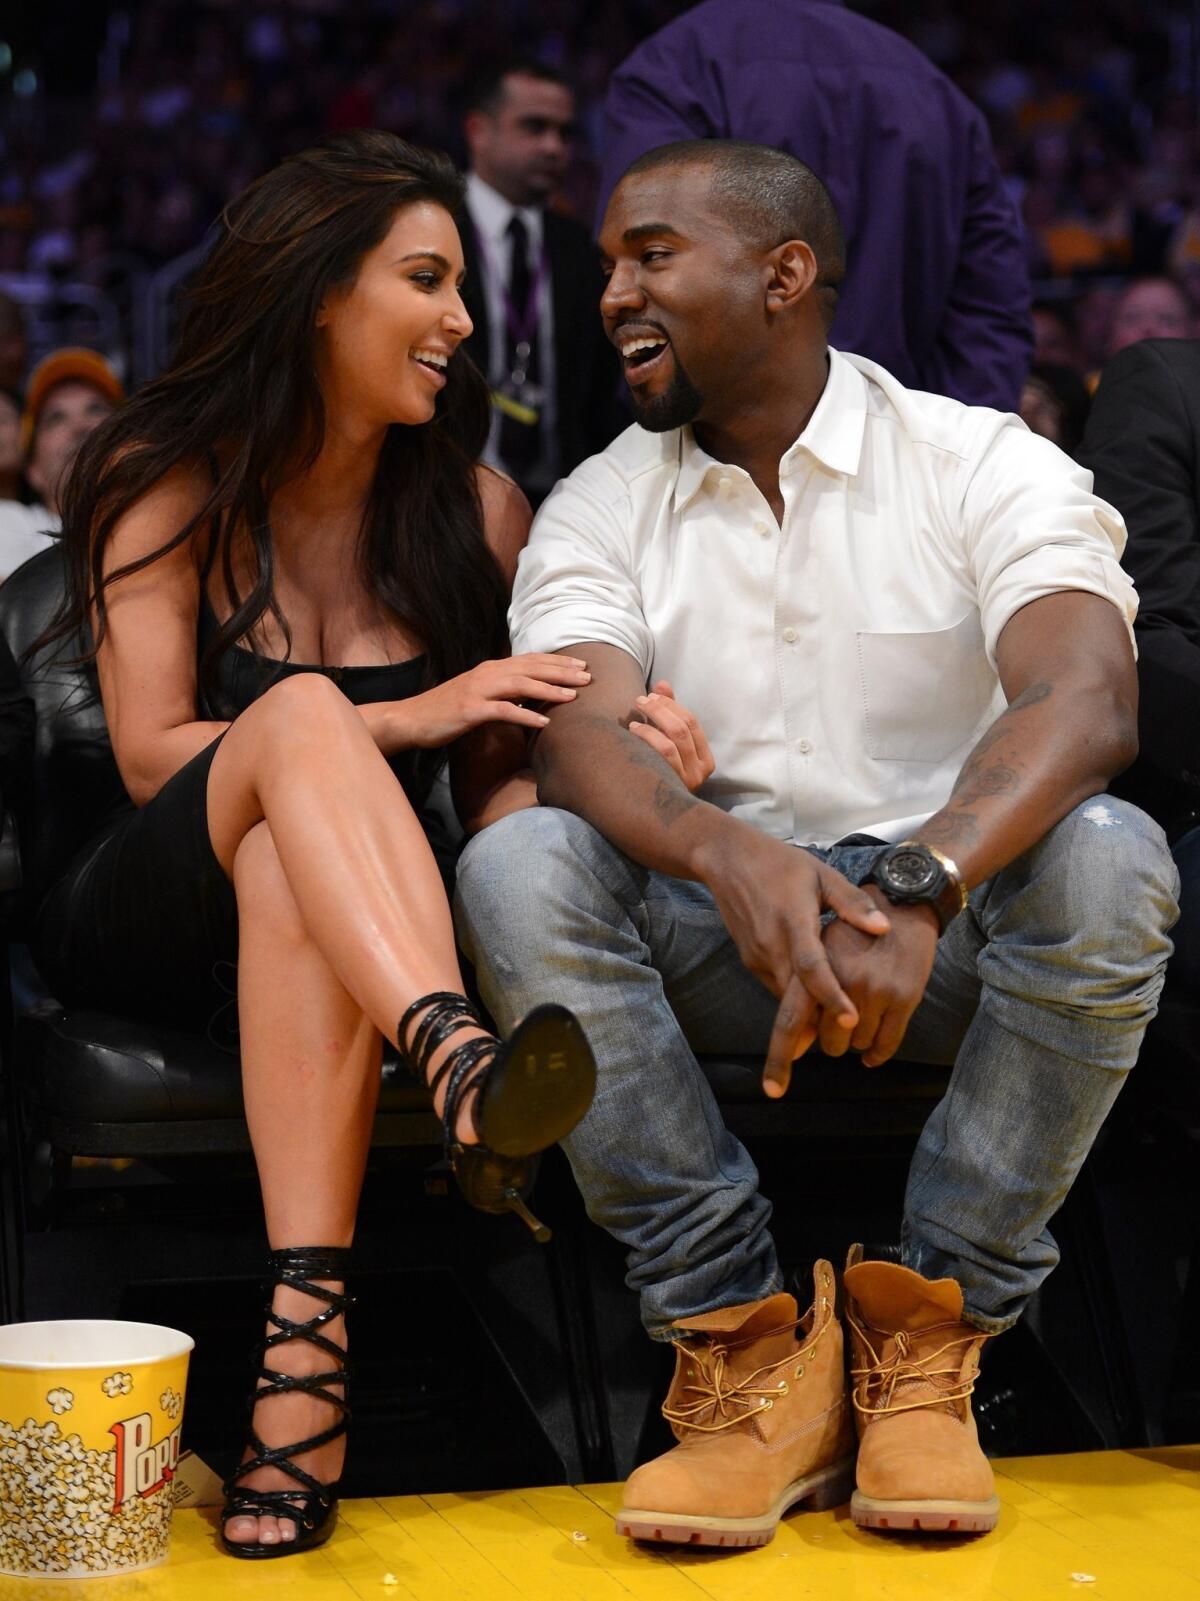 Kim Kardashian and Kanye West, sharing a laugh at a Lakers game in this file photo, are officially engaged.